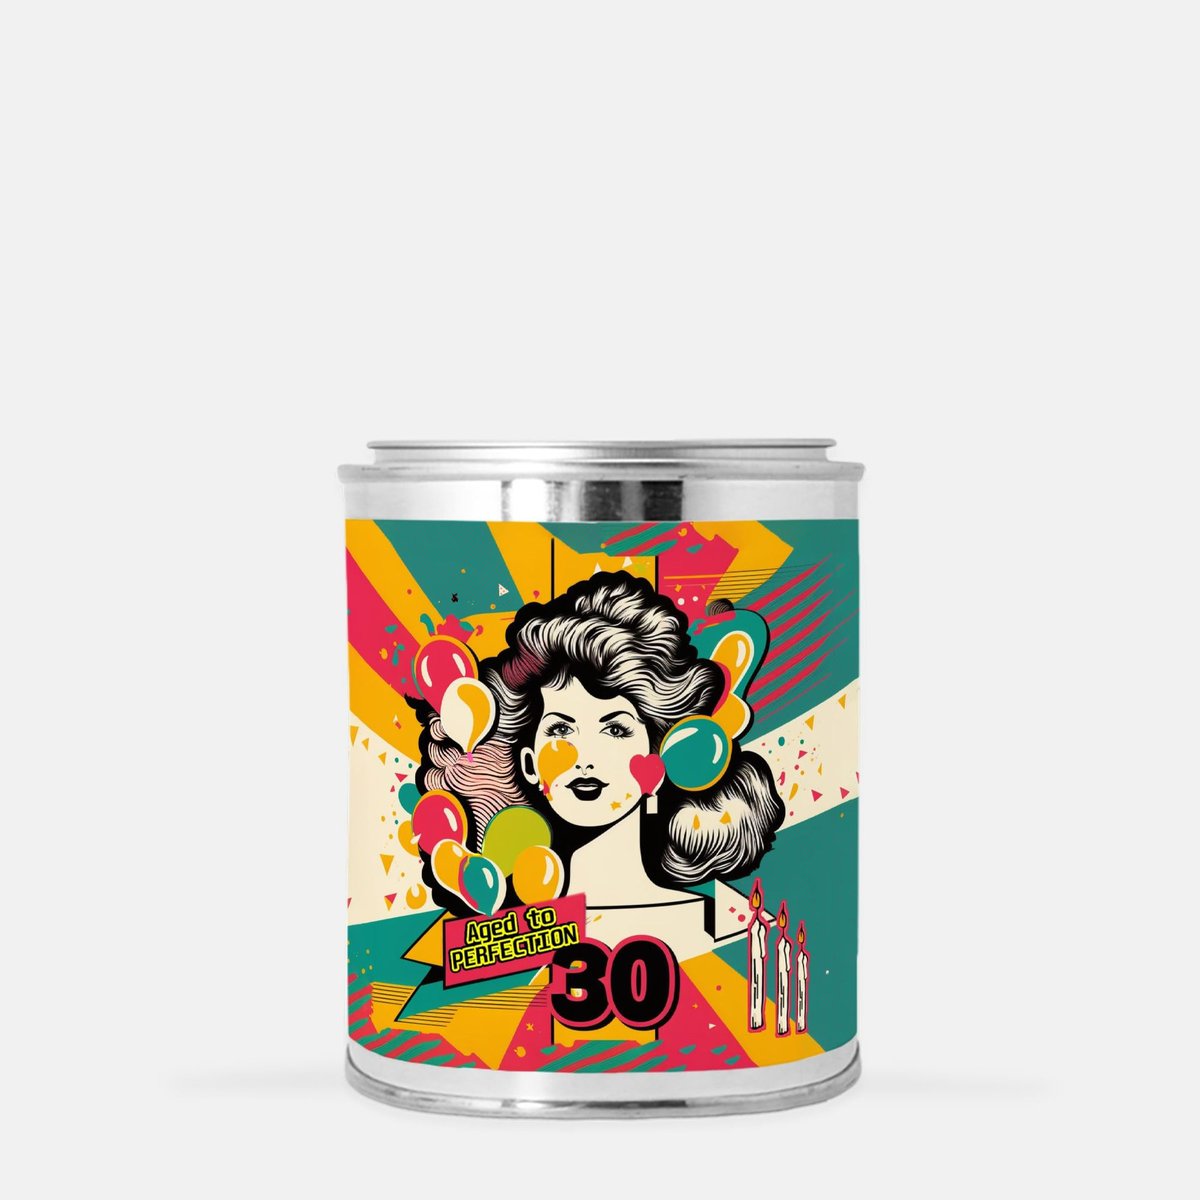 Birthday Candle Design | Paint Can Candle | %100 Natural | 30th Birthday Candle | Scented Candle etsy.me/3YLED7C #bedroom #organicingredients #gift #giftcandle #birthday #birthdaygift #30thbirthday #scent #scentedcandle